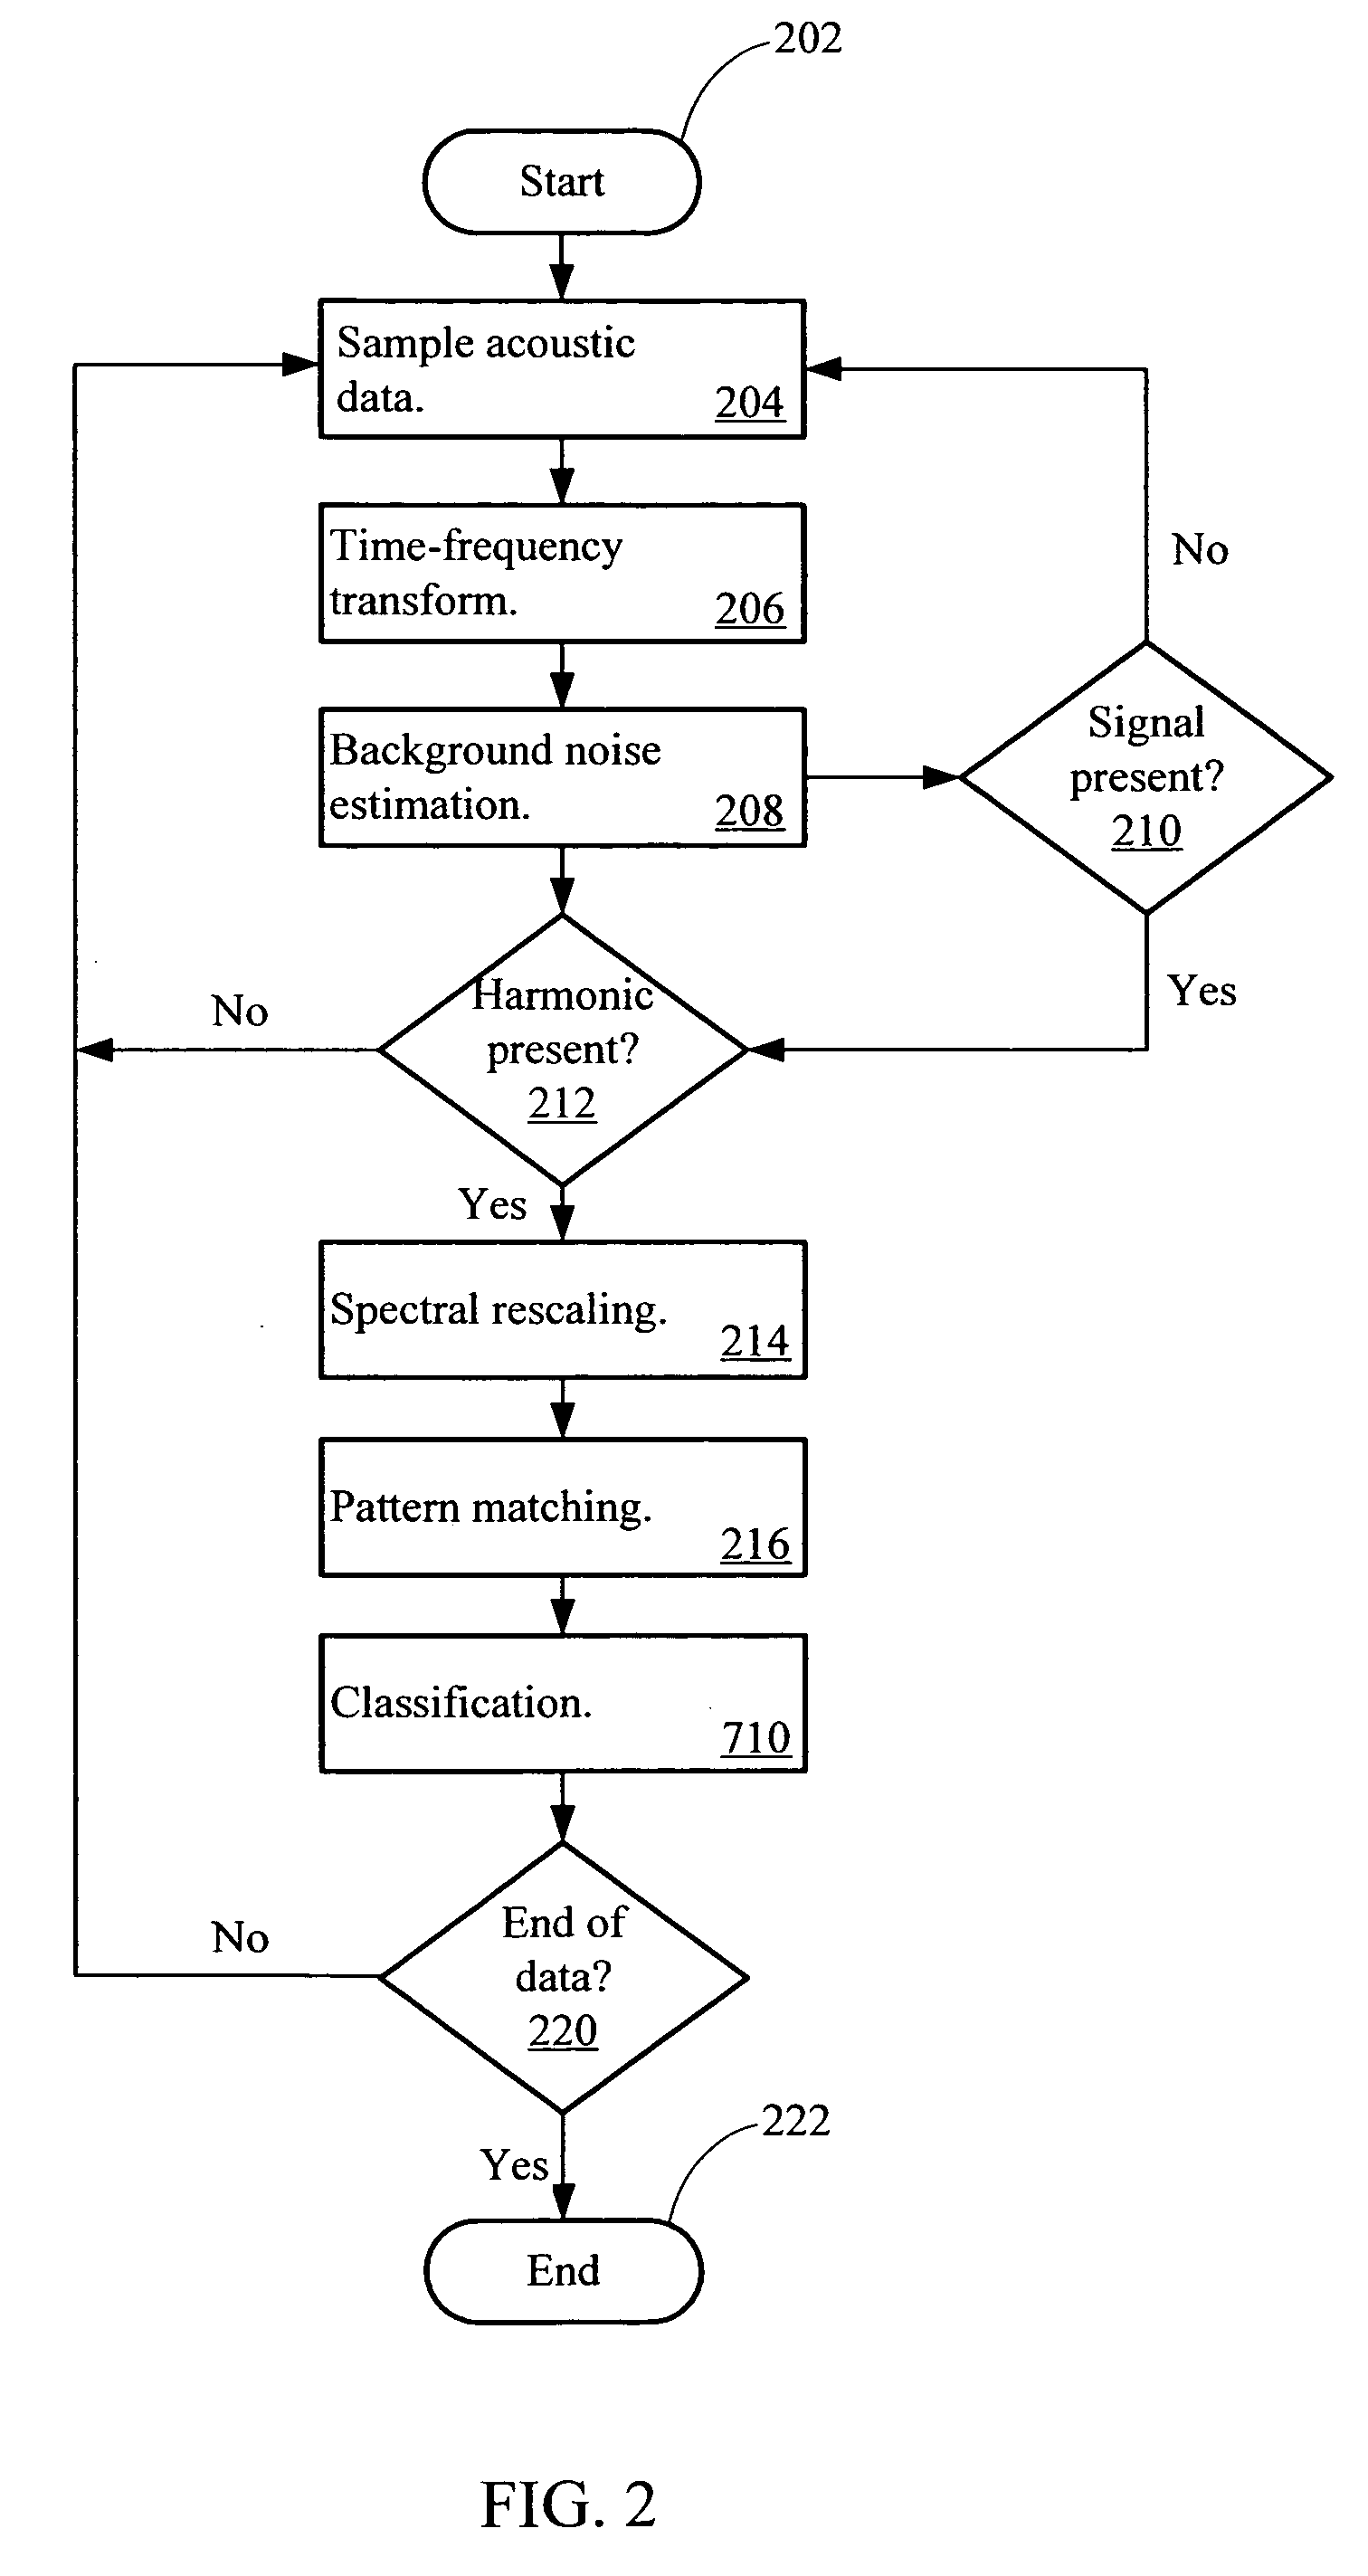 Acoustic signal classification system